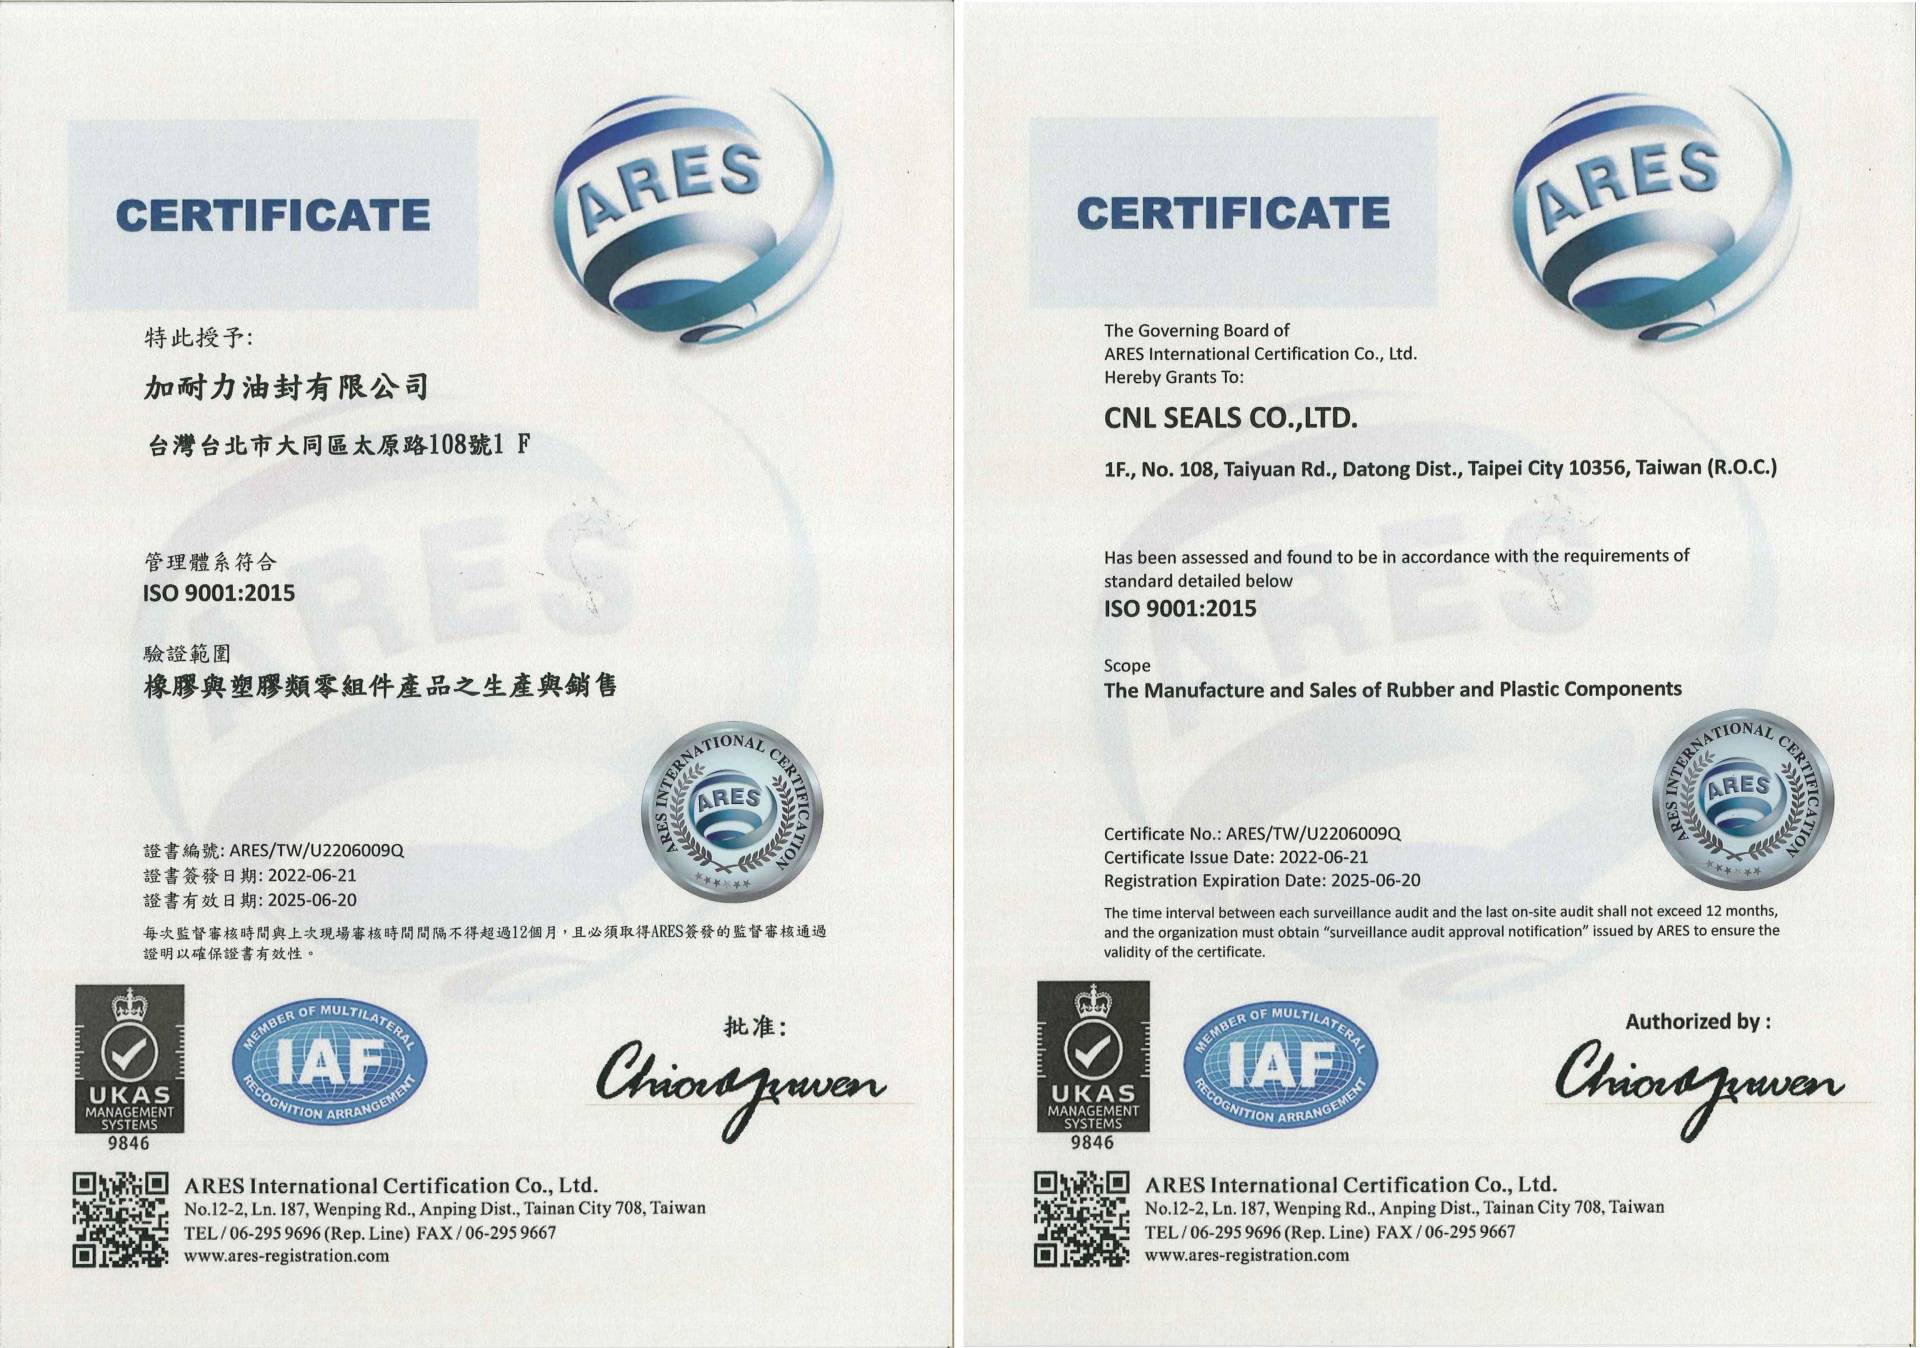 qualified the ISO9001:2015;comply with international standards